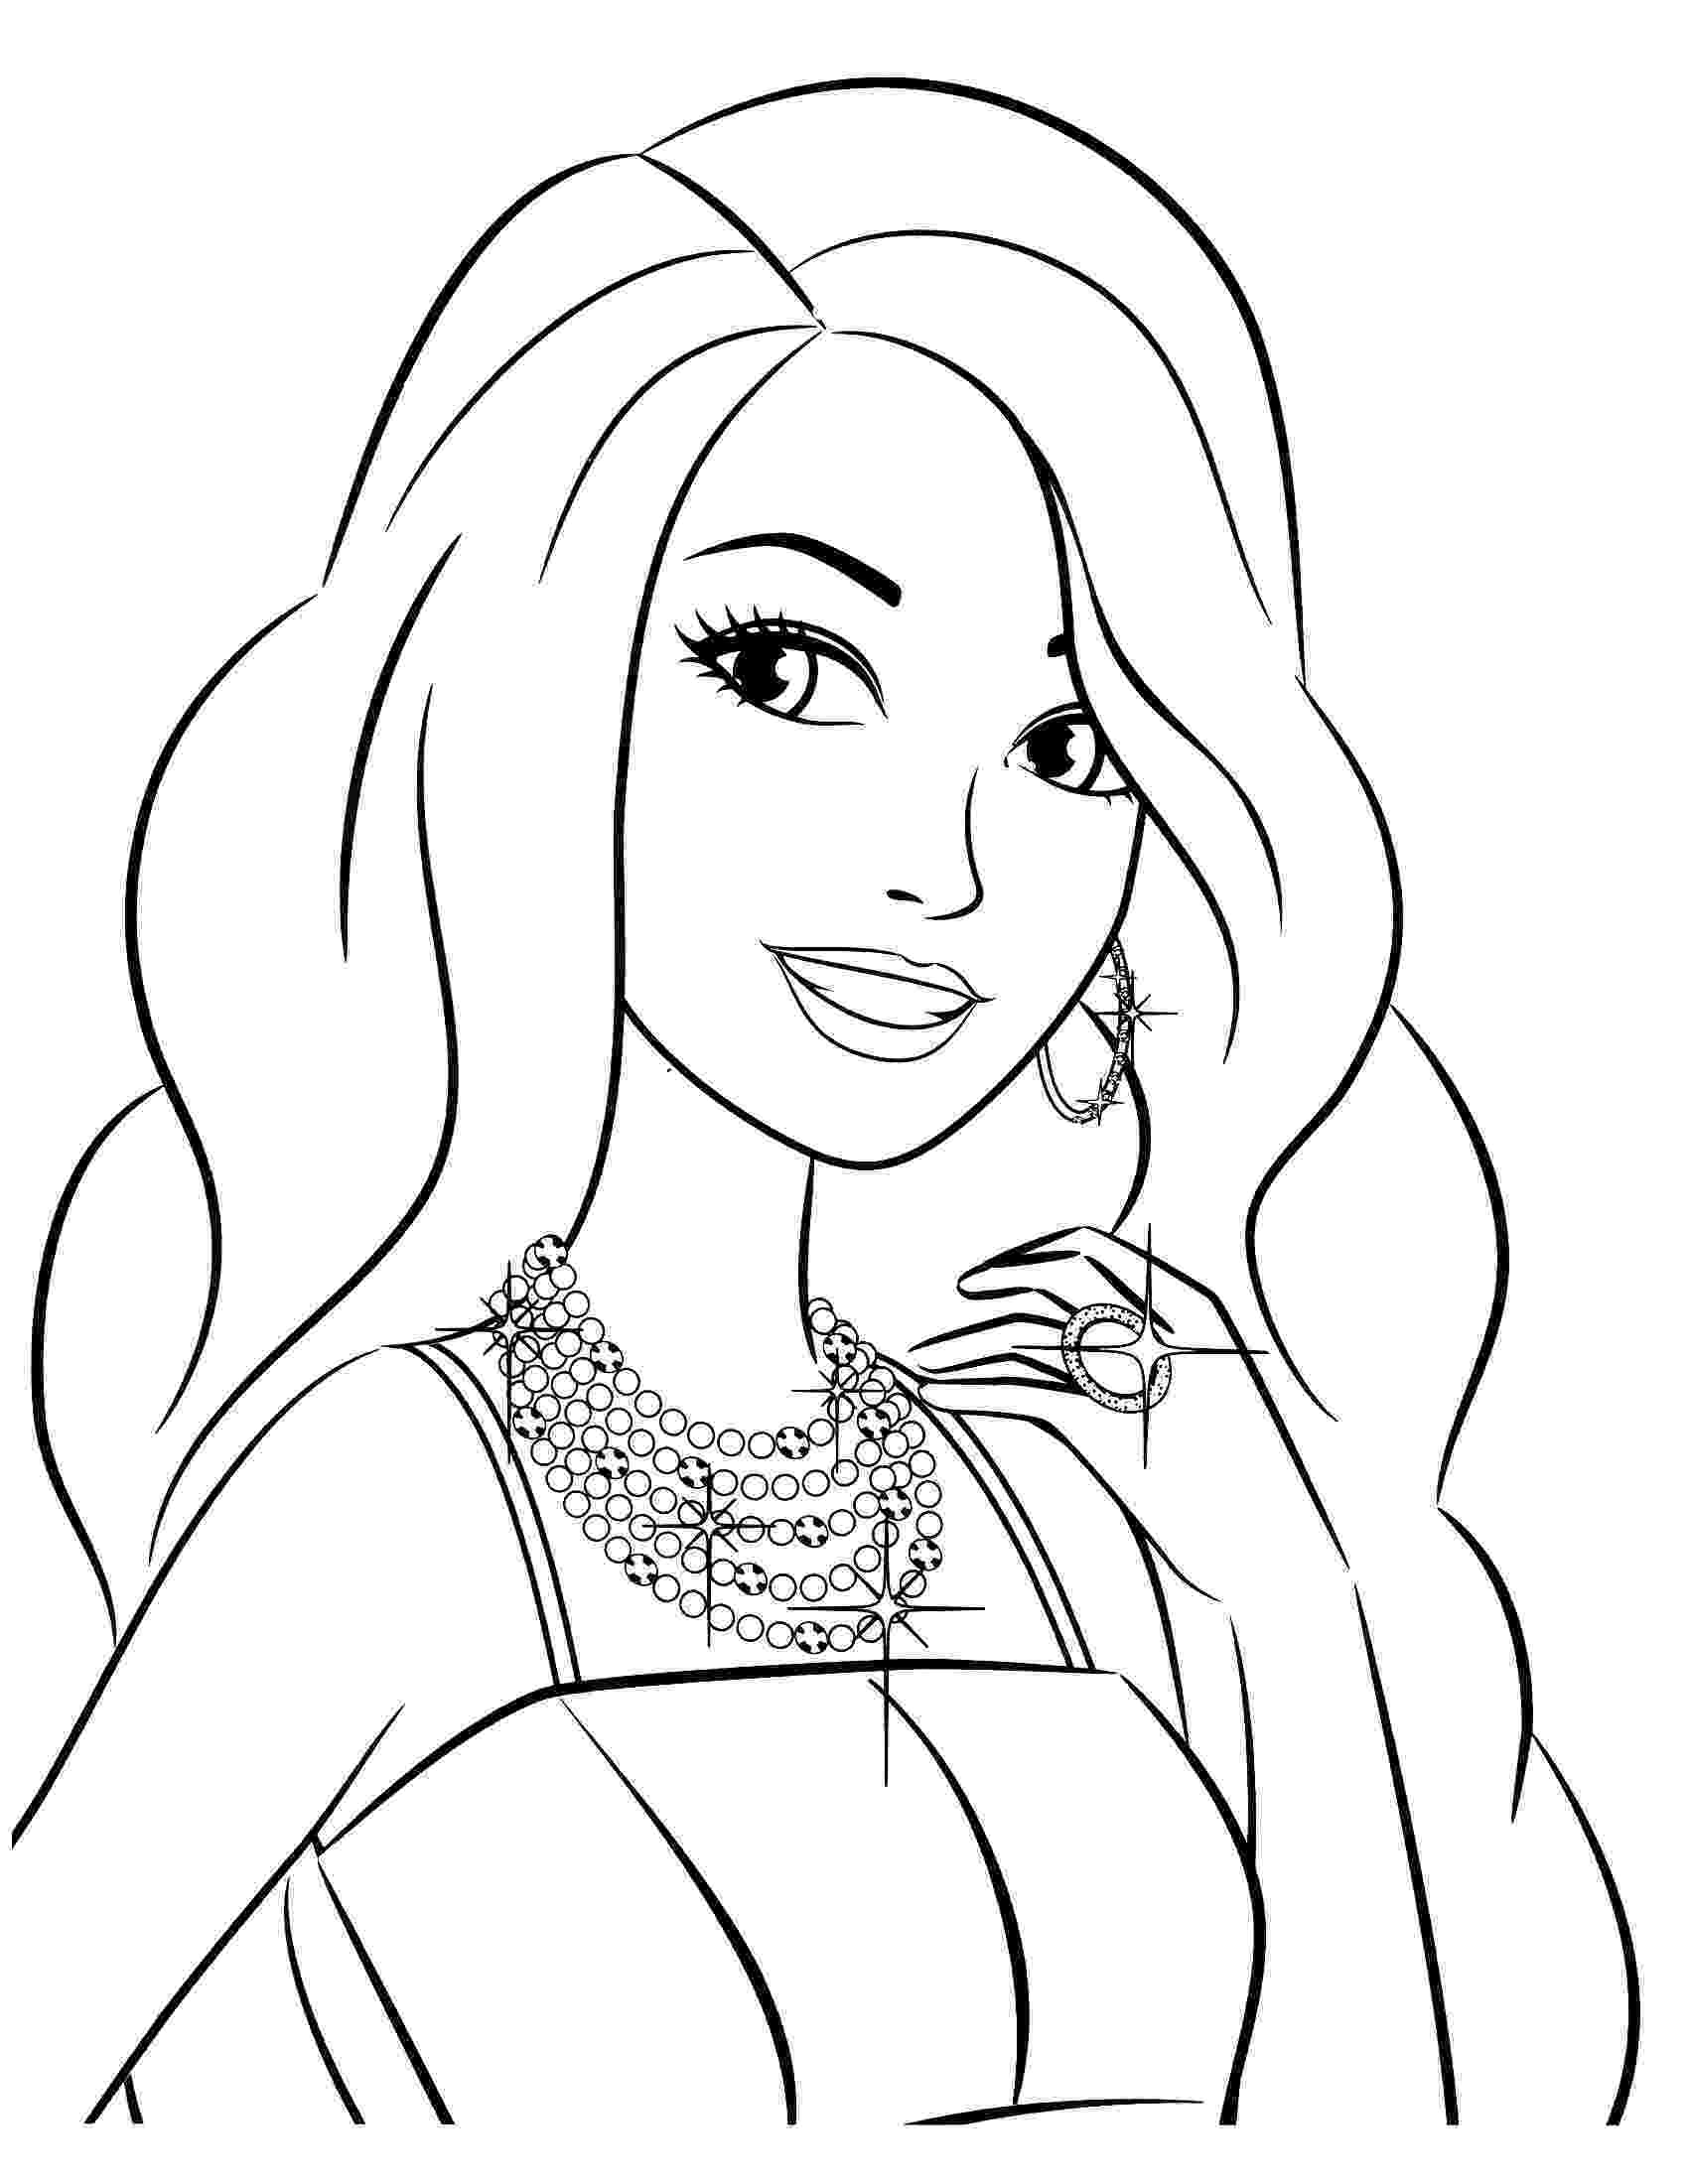 barbie print out coloring pages printable barbie princess coloring pages for kids cool2bkids coloring pages barbie print out 